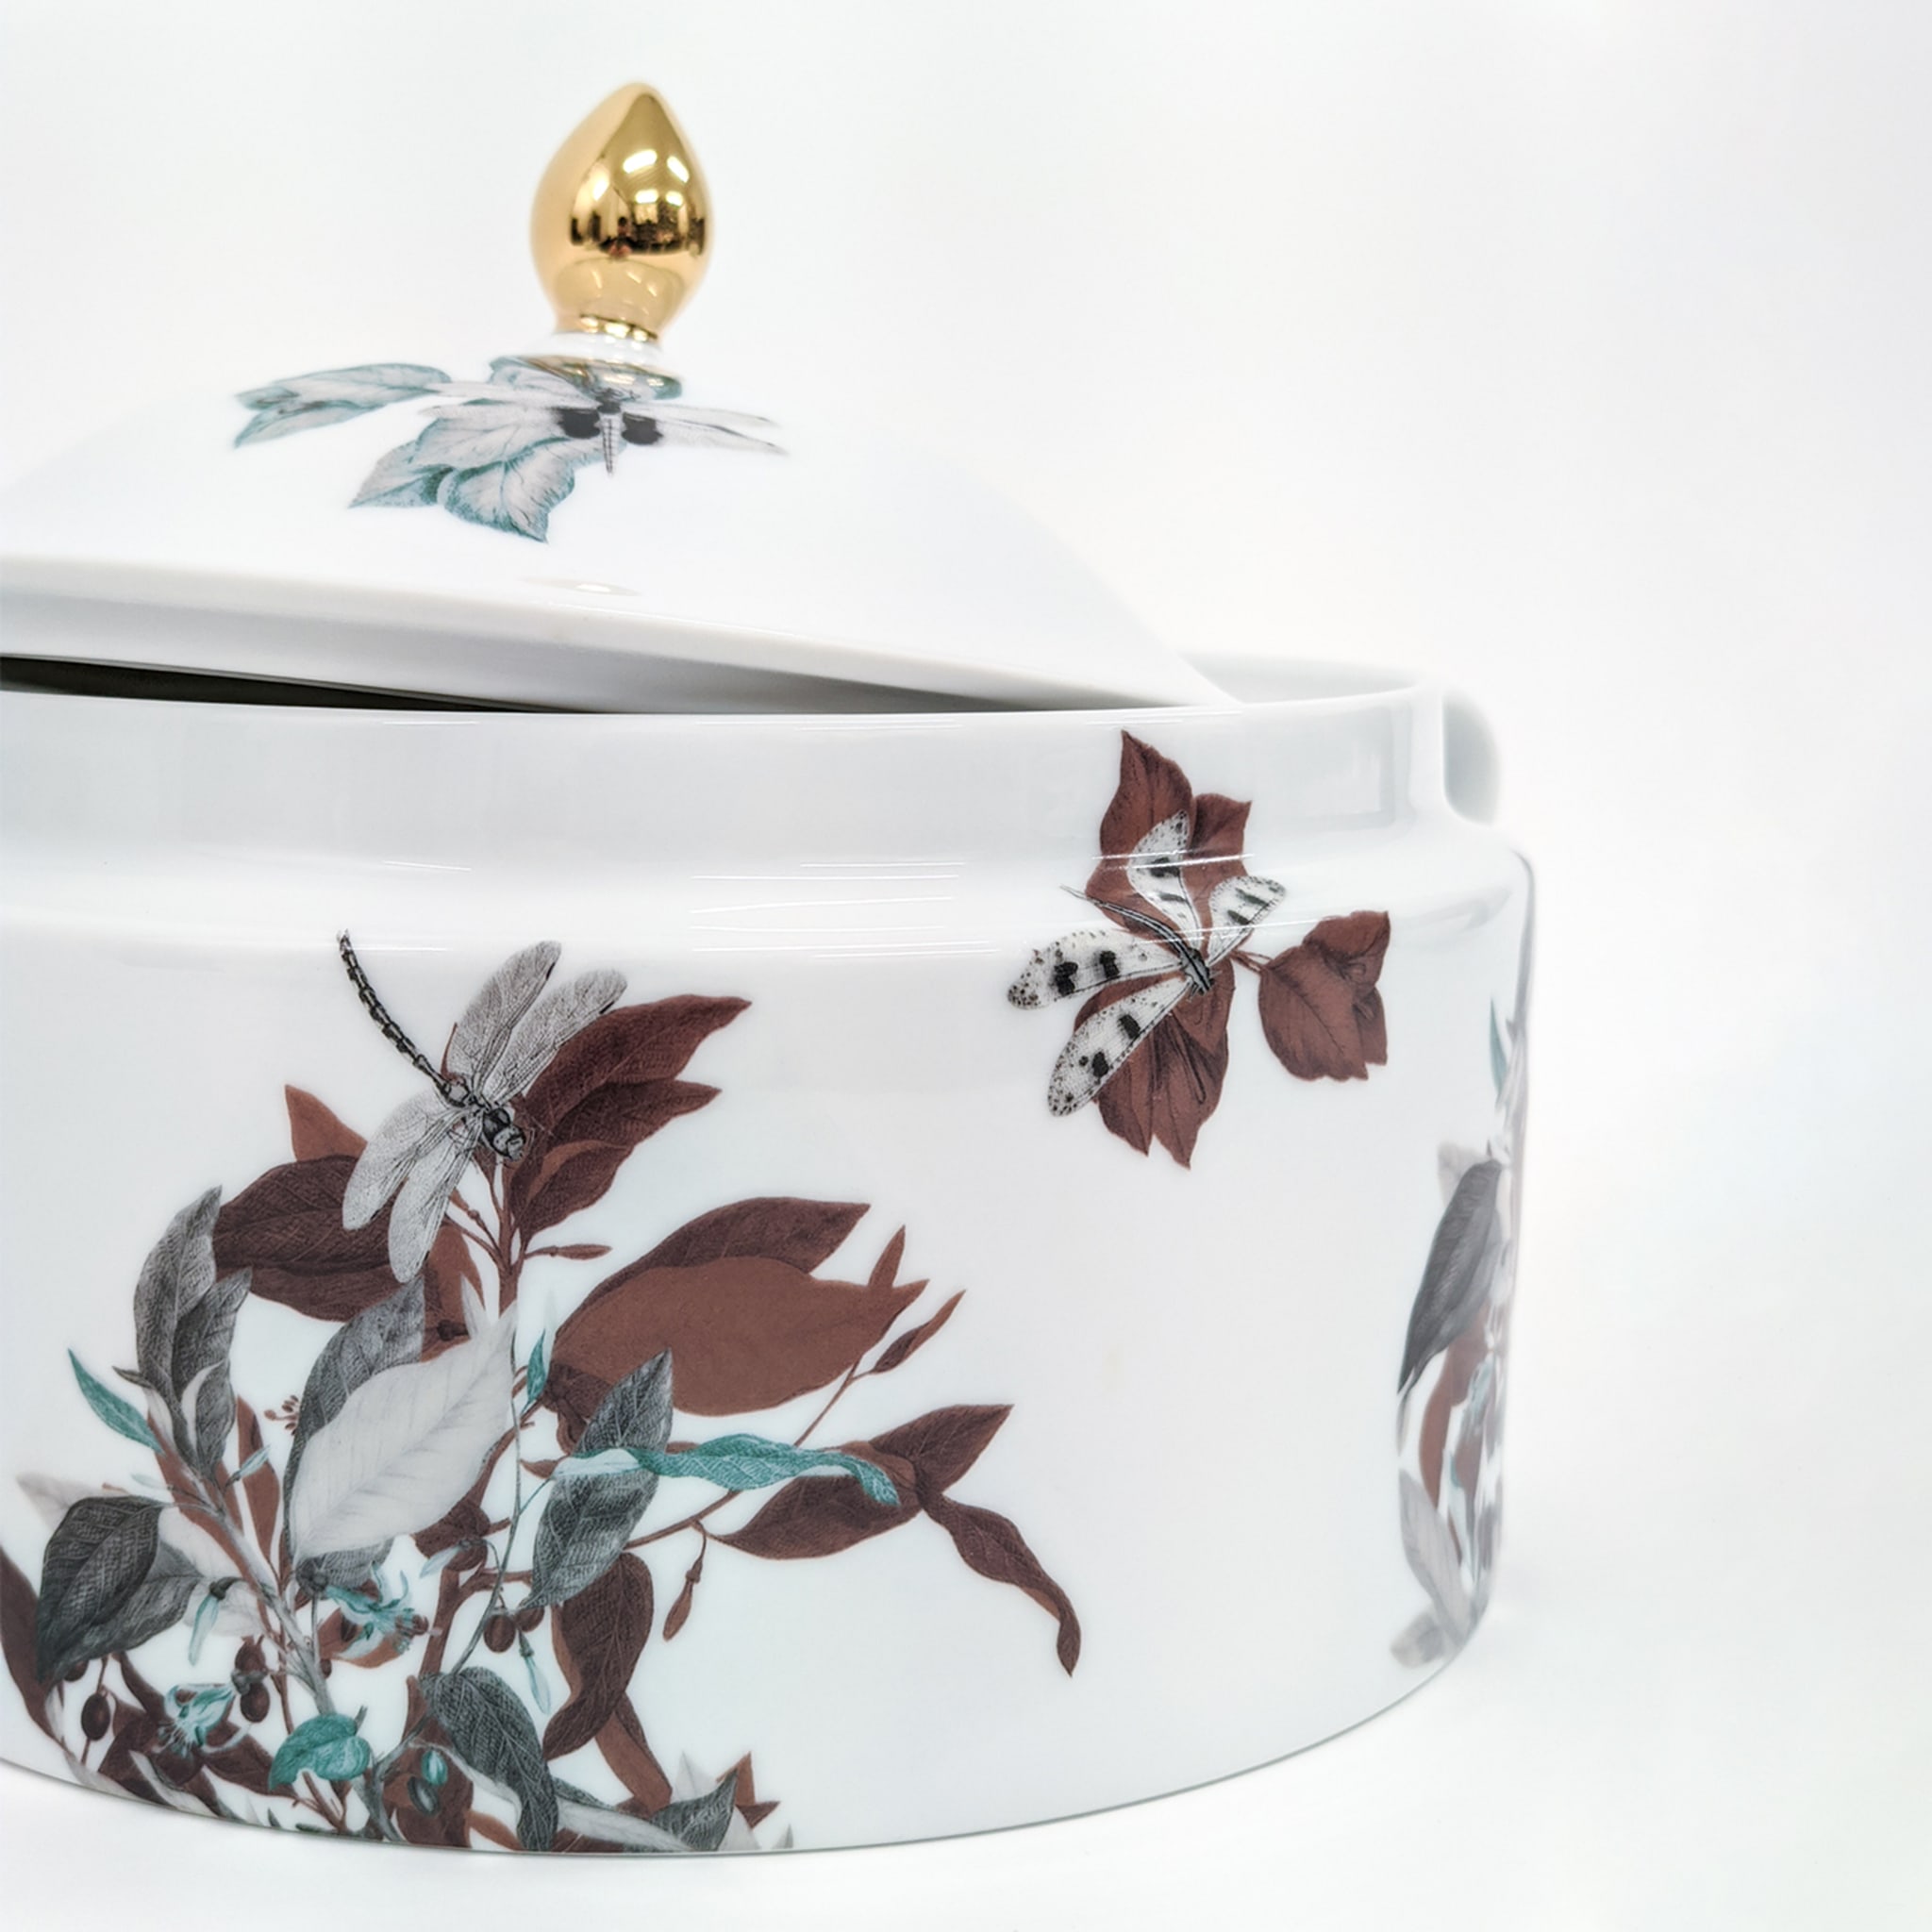 Black Dragon Pool Porcelain Tureen With Leaves And Dragonflies - Alternative view 2